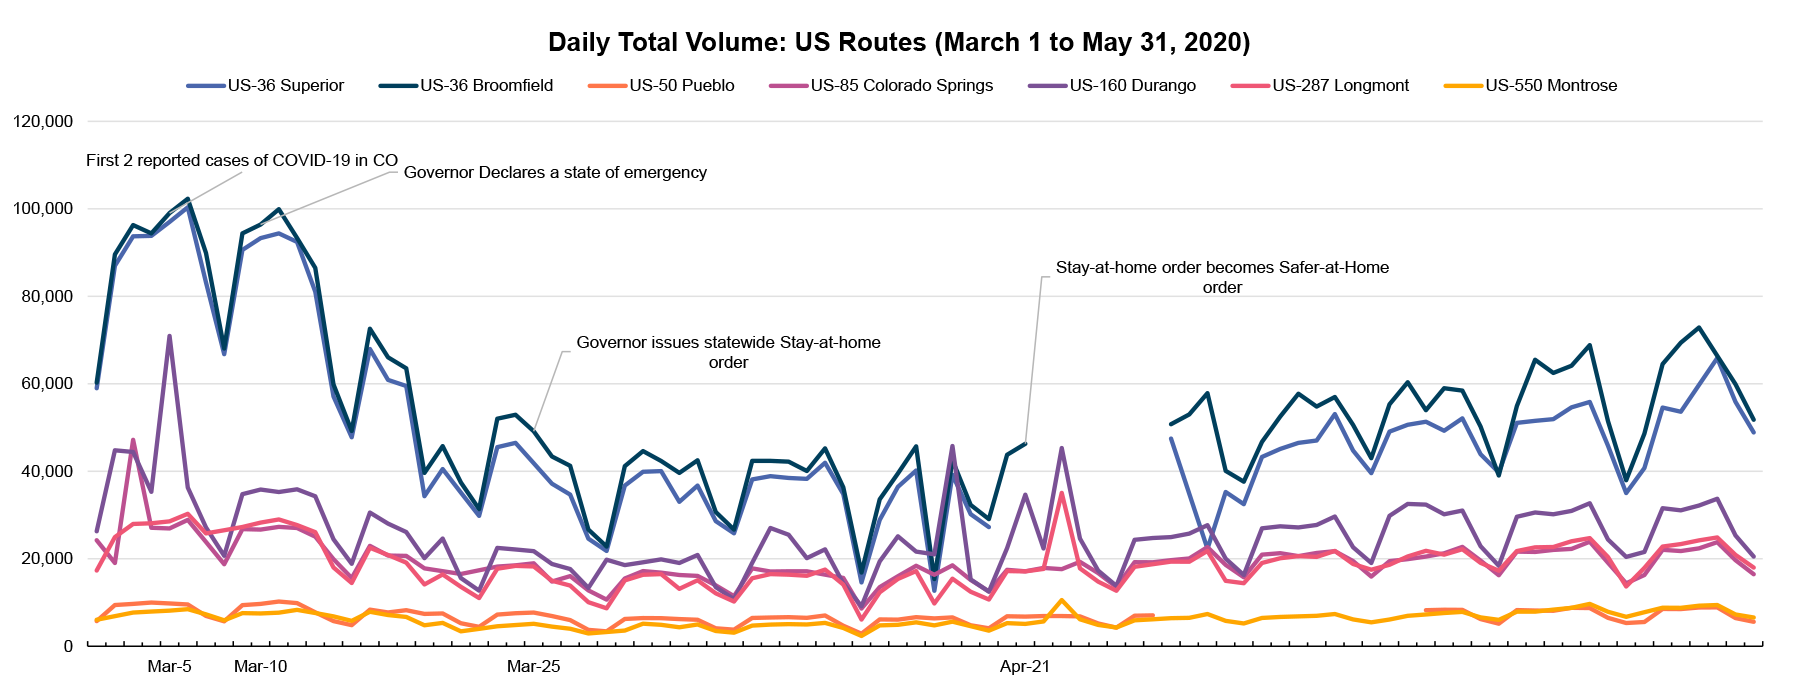 Colorado U.S. Highways Daily Total Traffic Volumes March 1 through May 31, 2020